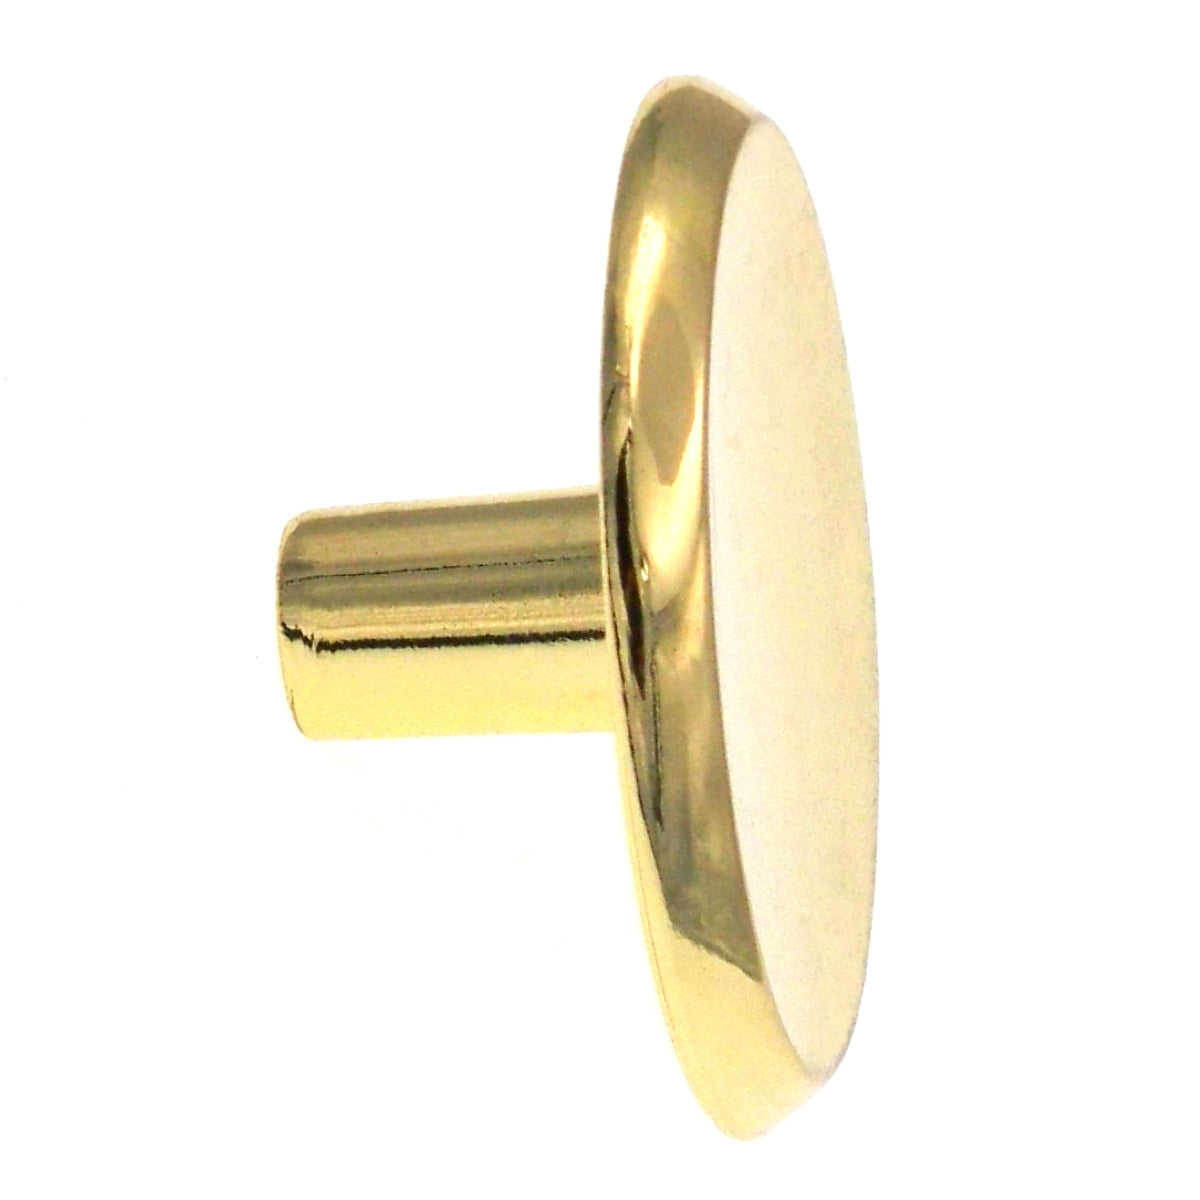 5 Pack of Ultra Designer's Edge Polished Brass Round 1 3/8" Knobs 98551